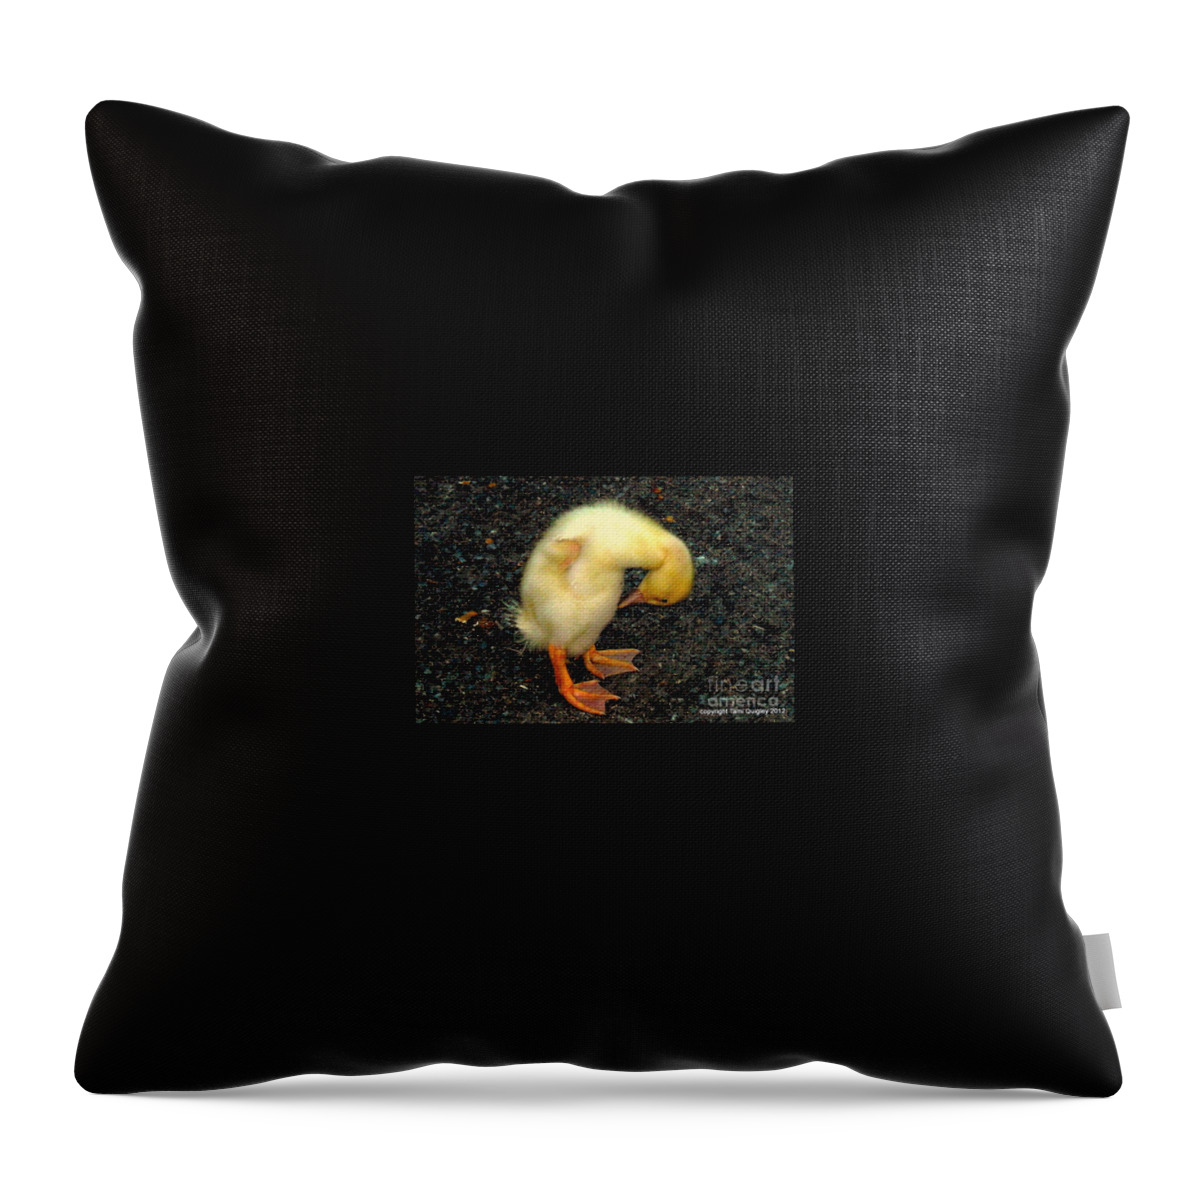 Duckling Throw Pillow featuring the photograph Duckling Takes A Bow by Tami Quigley